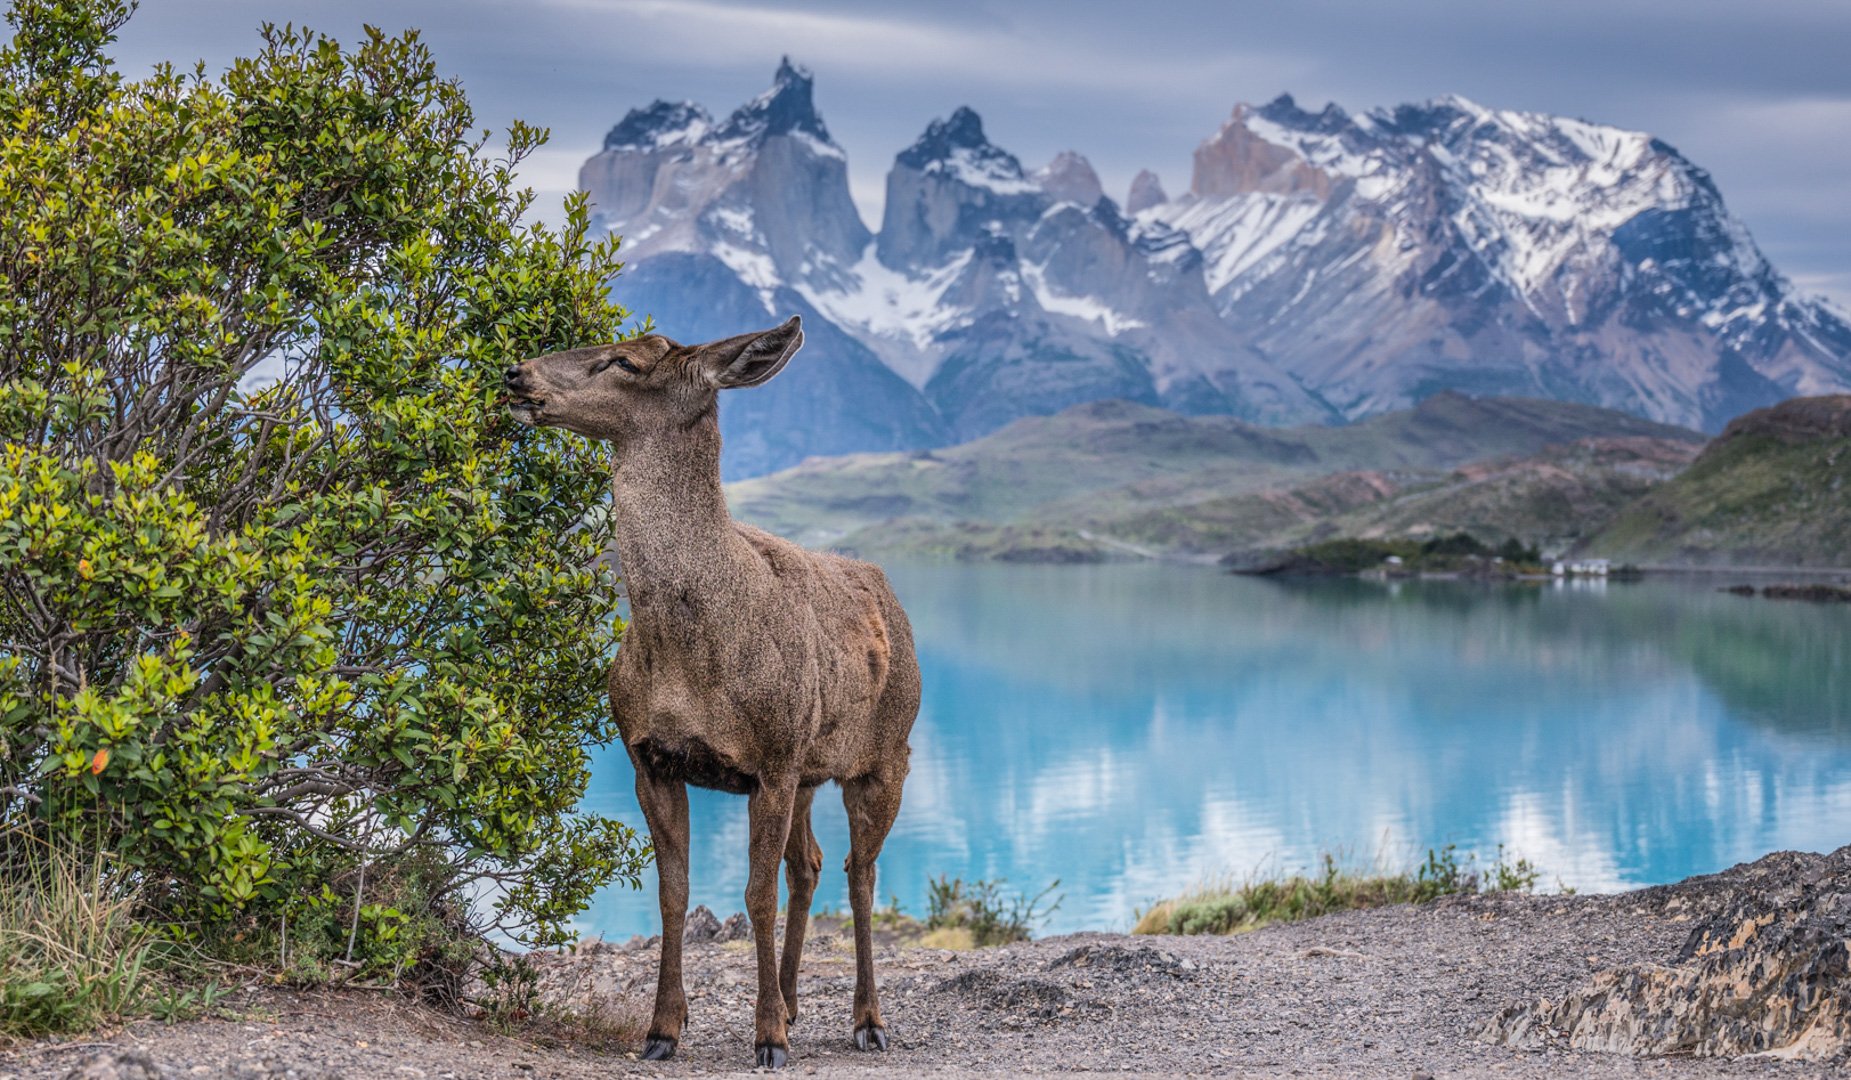 20 Insane Pictures of Torres del Paine You'll Only See on Instagram